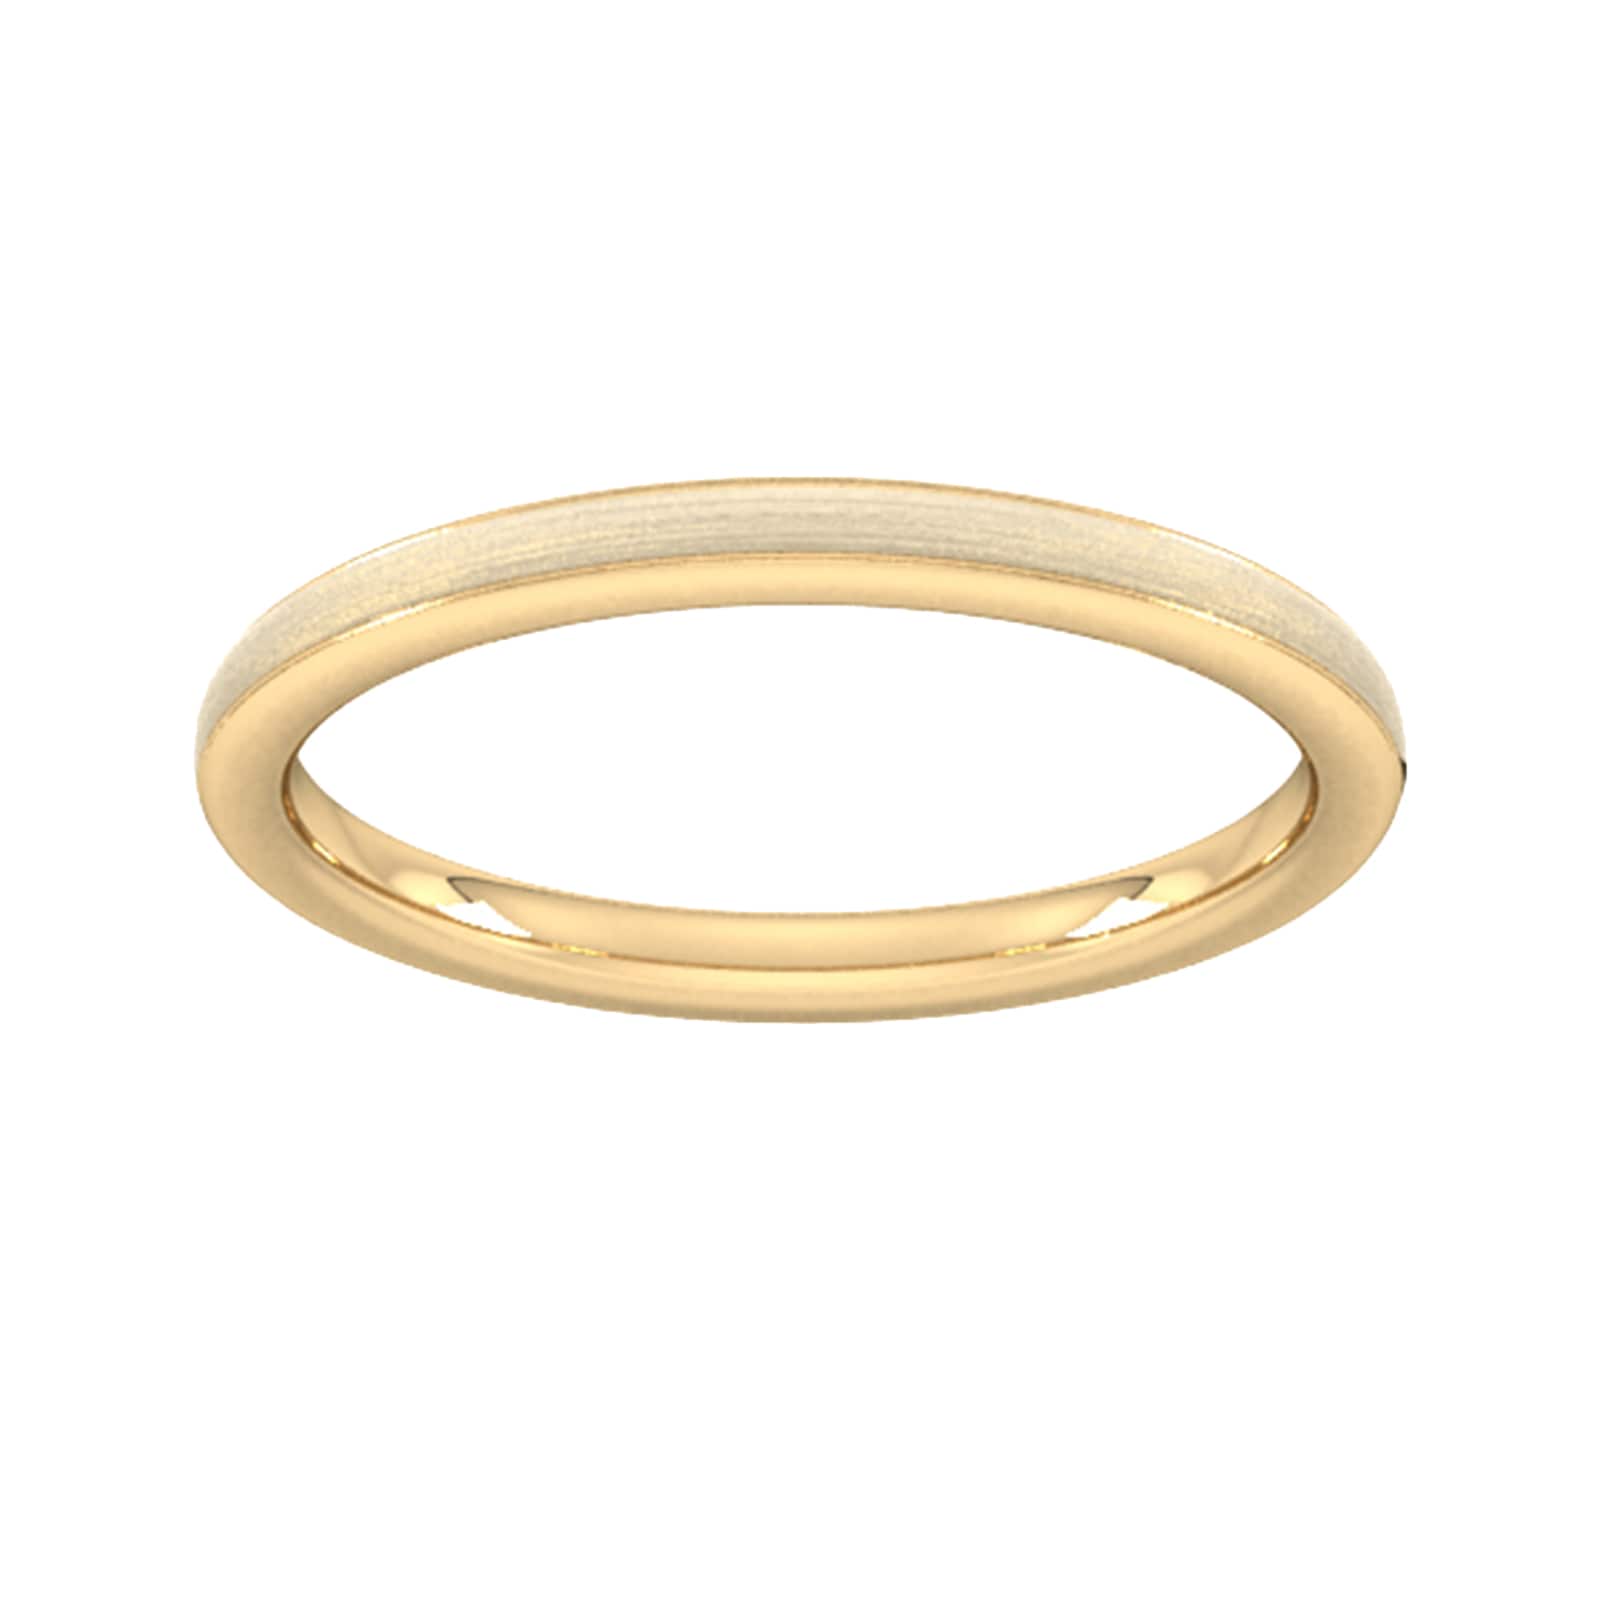 2mm Slight Court Heavy Matt Centre With Grooves Wedding Ring In 9 Carat Yellow Gold - Ring Size N